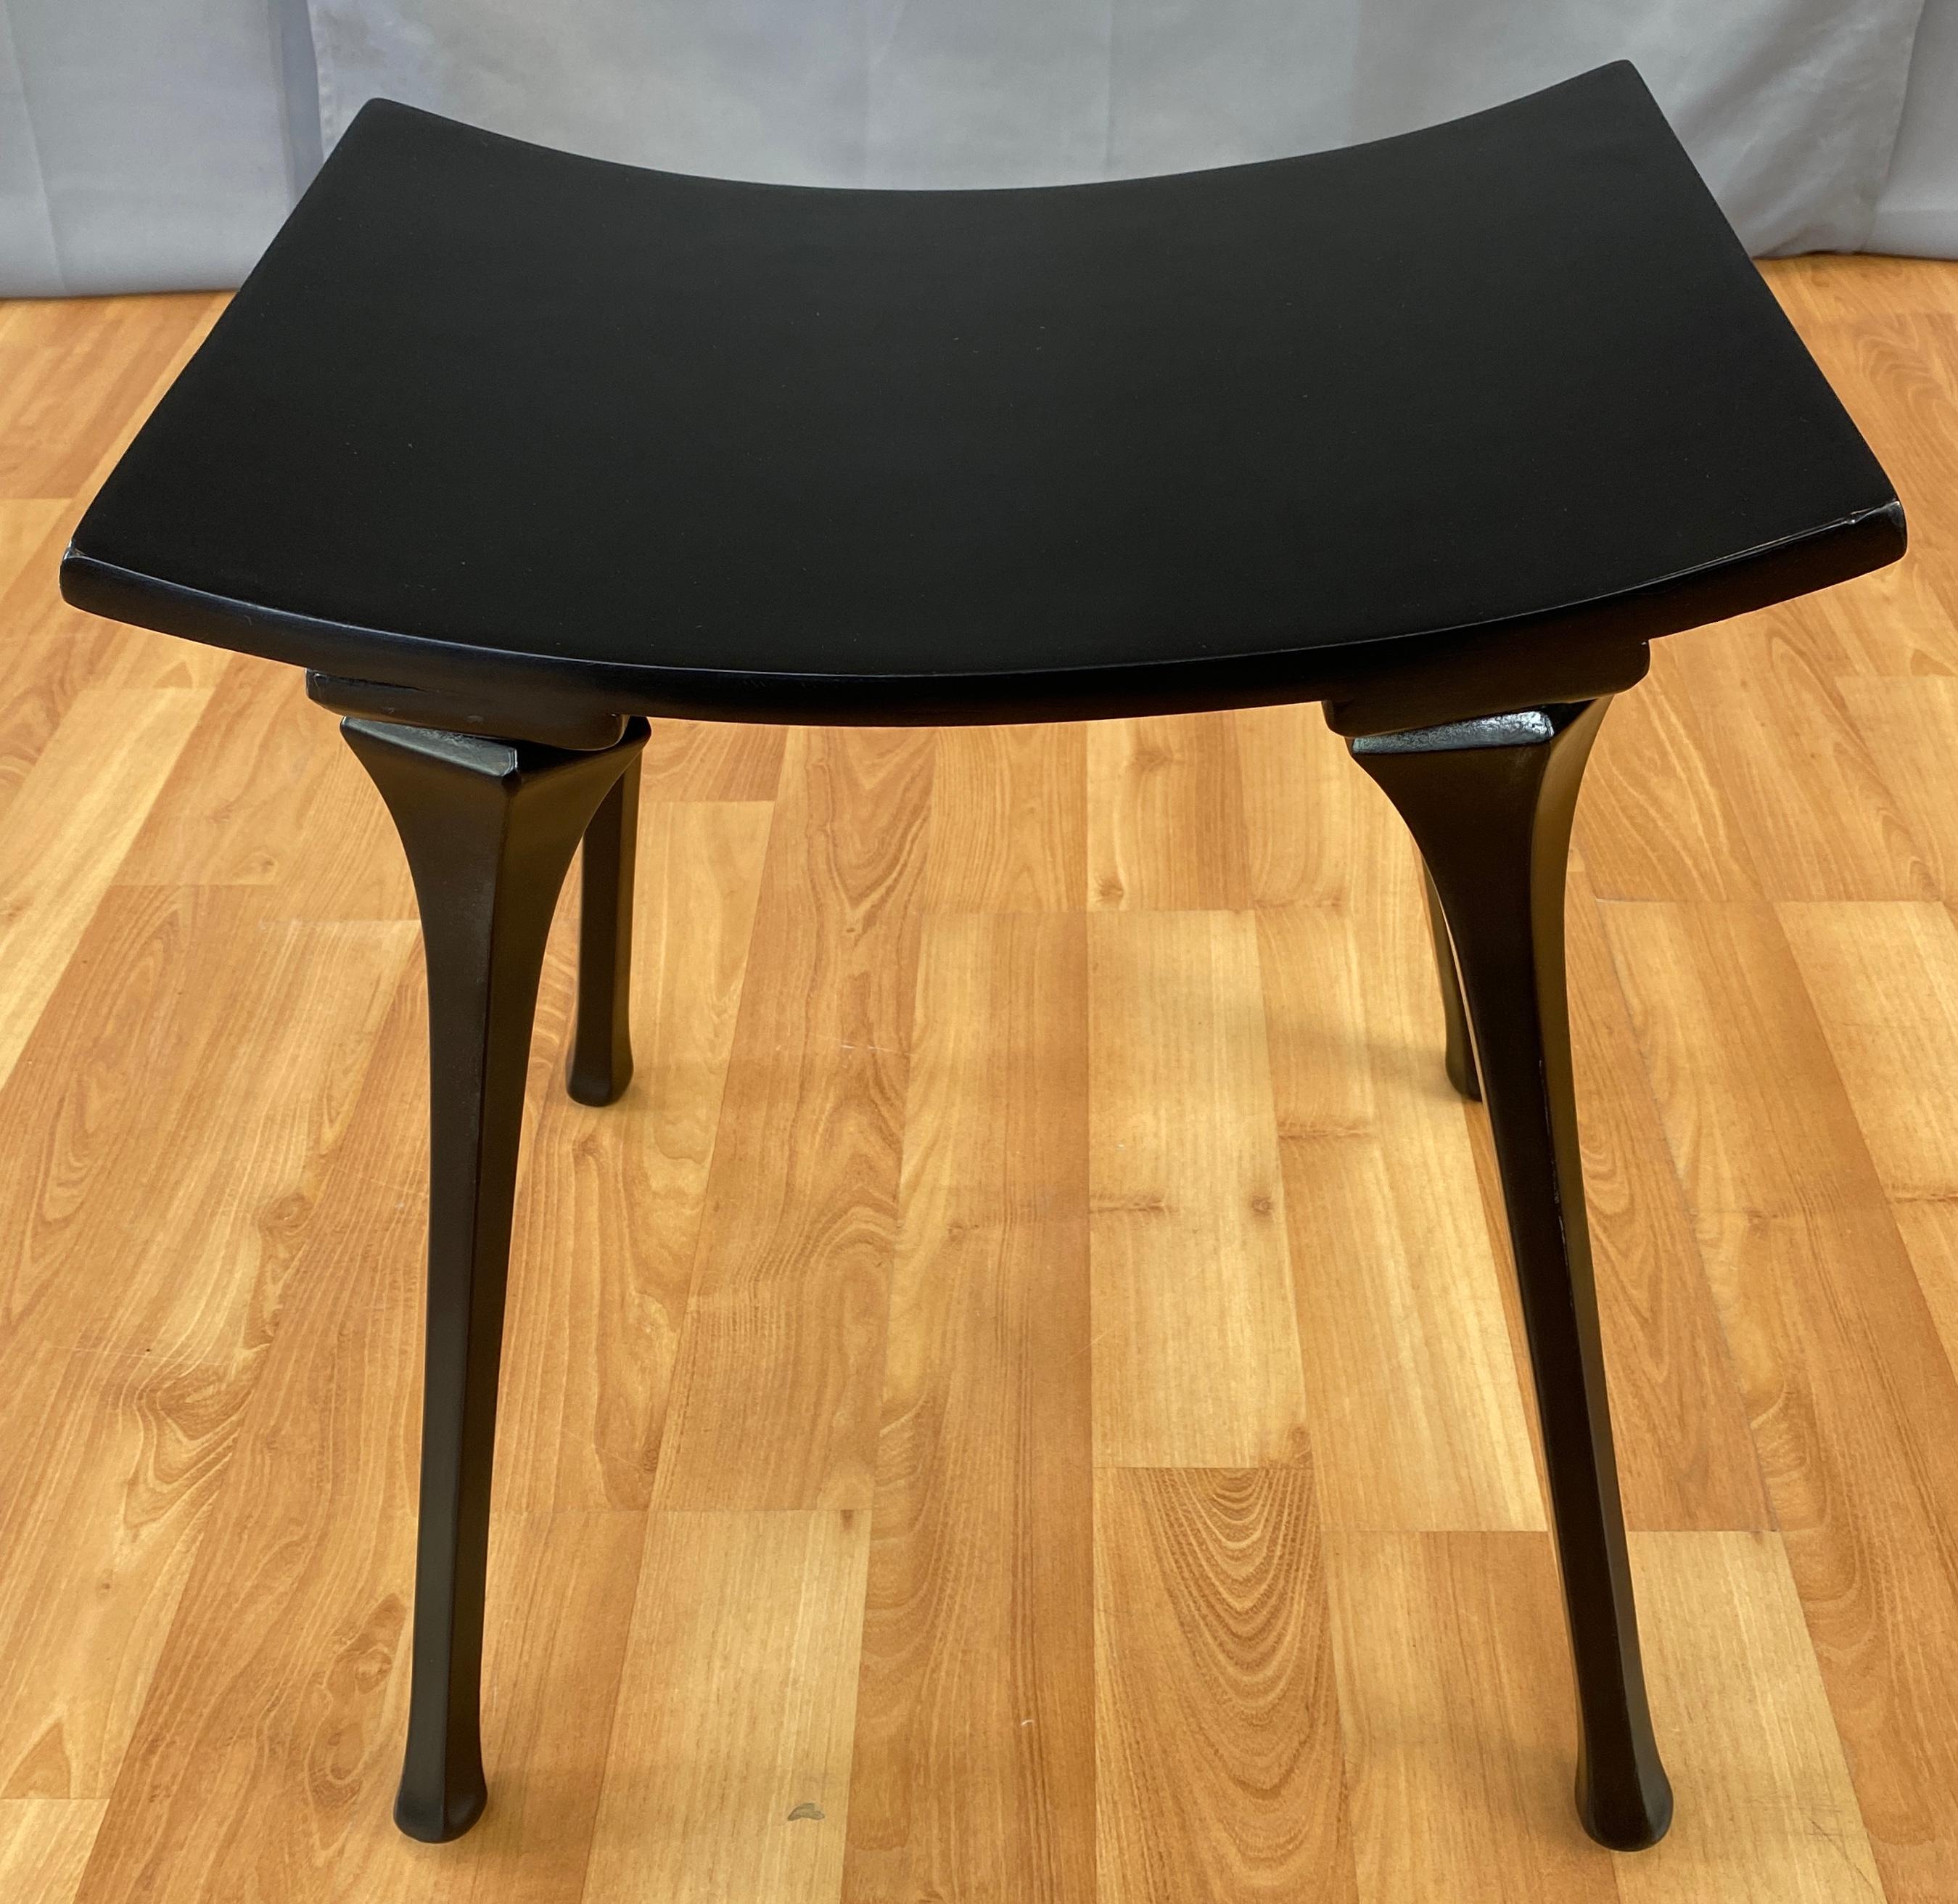 Old School Glam Black Wooden Stool circa 1940s/50s For Sale 2